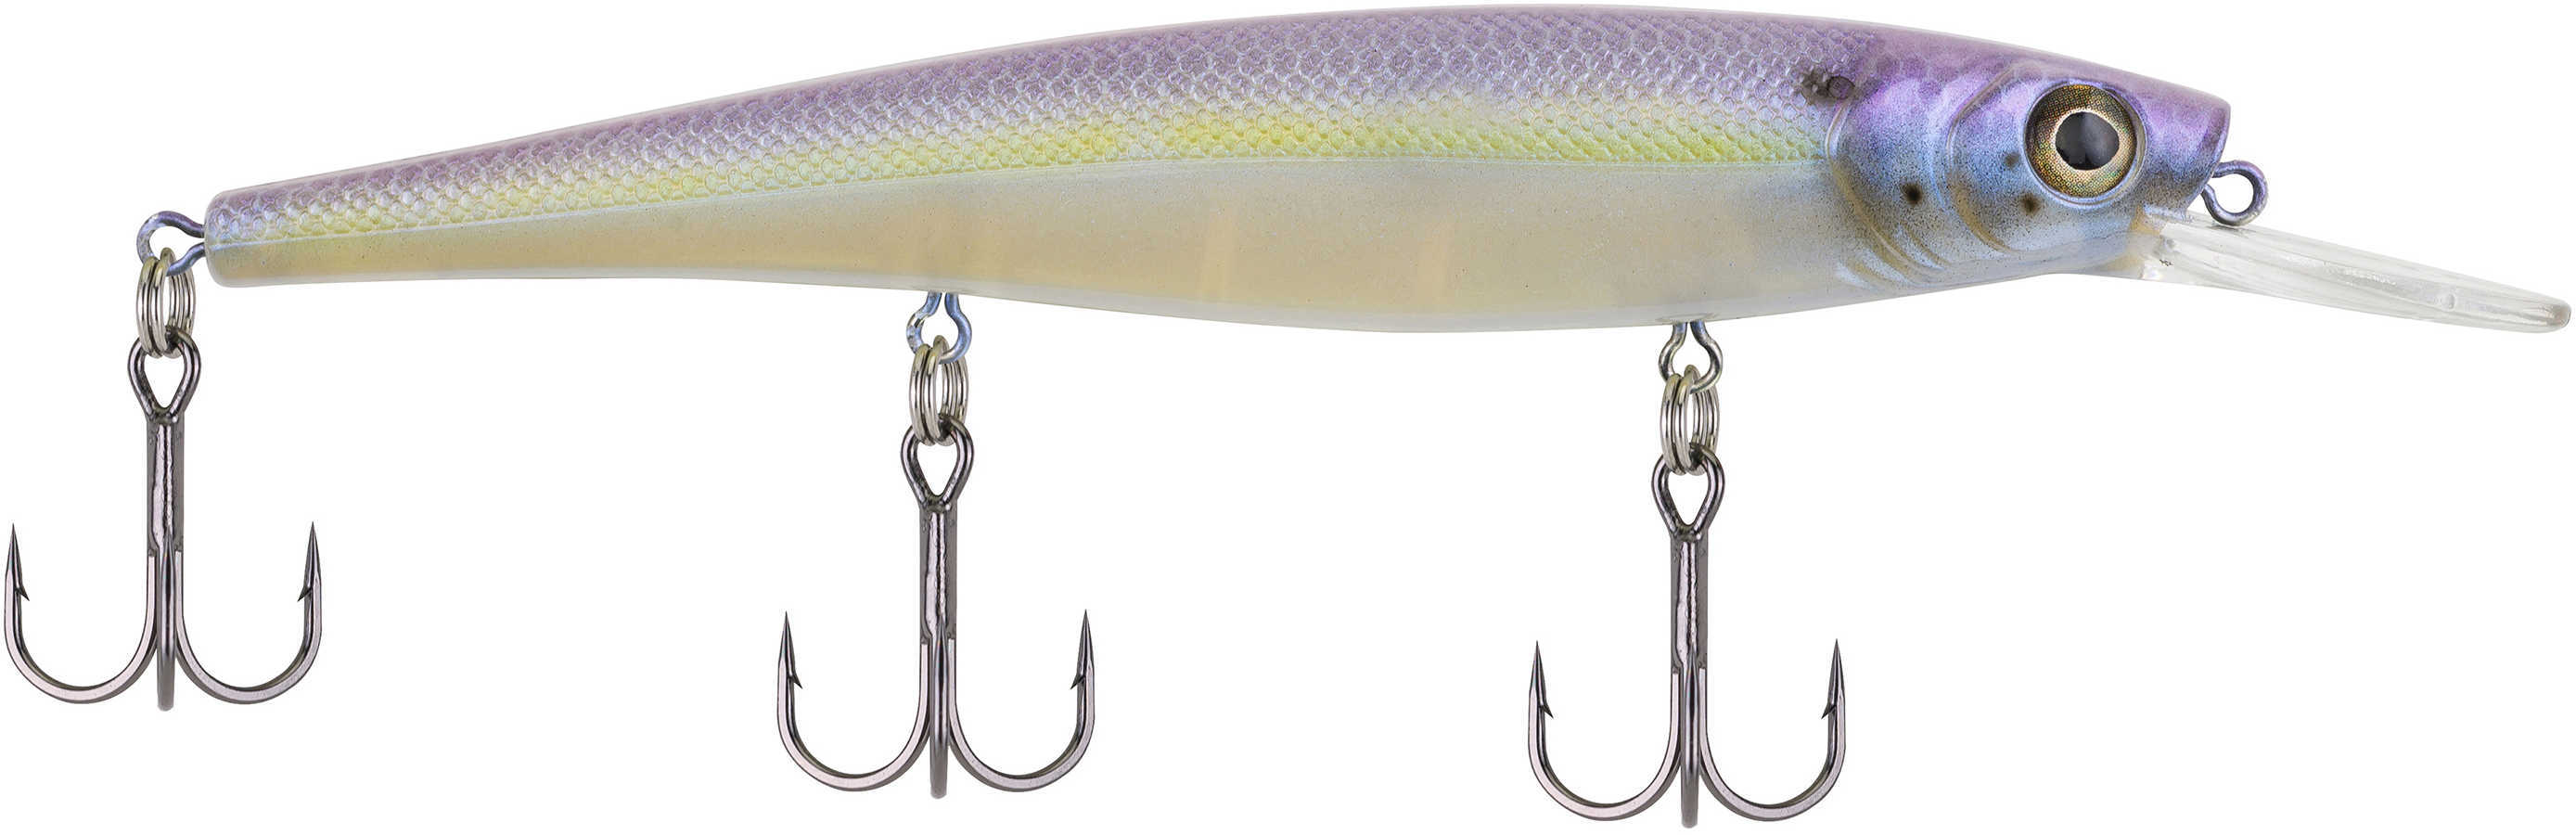 Berkley Skinny Cutter 110+, 4 3/8" Length Chartreuse Shad, Pack Of 1